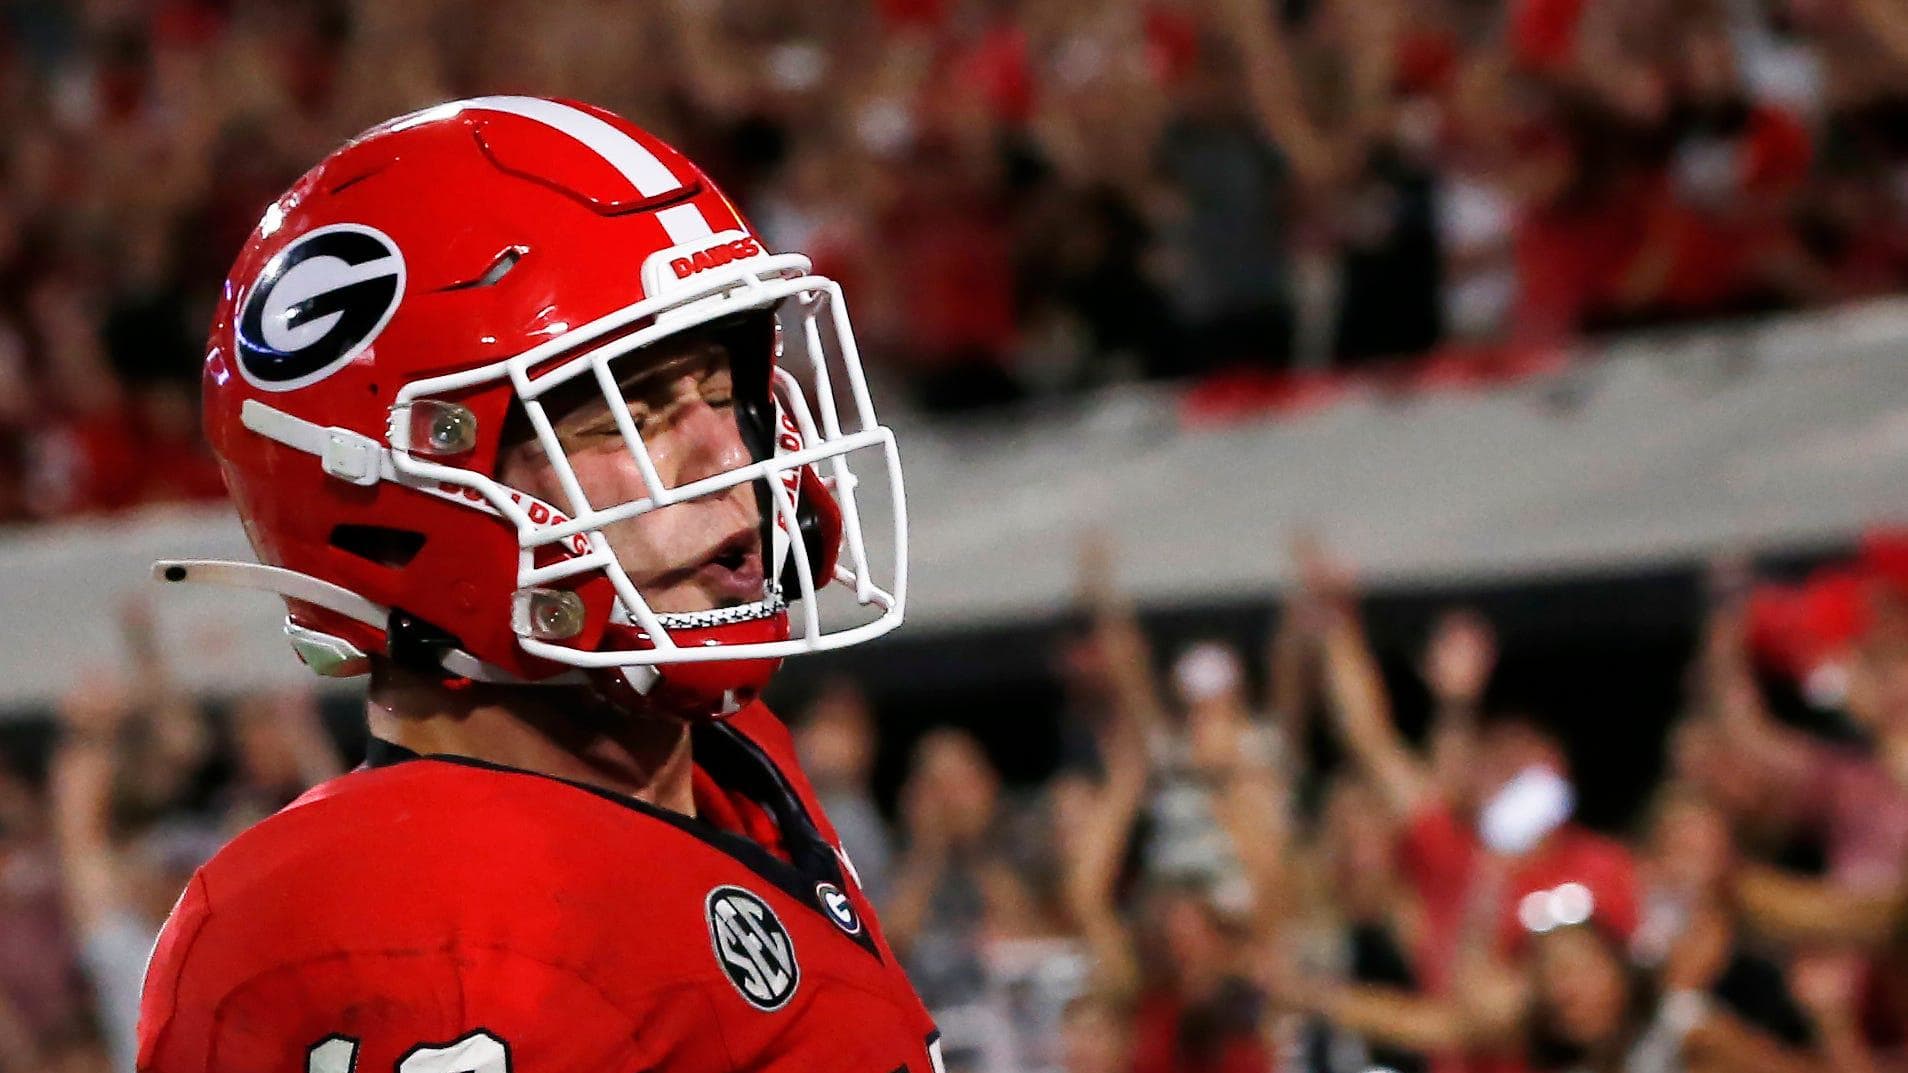 Georgia tight end Brock Bowers (19) celebrates after scoring a touchdown during the first half of a